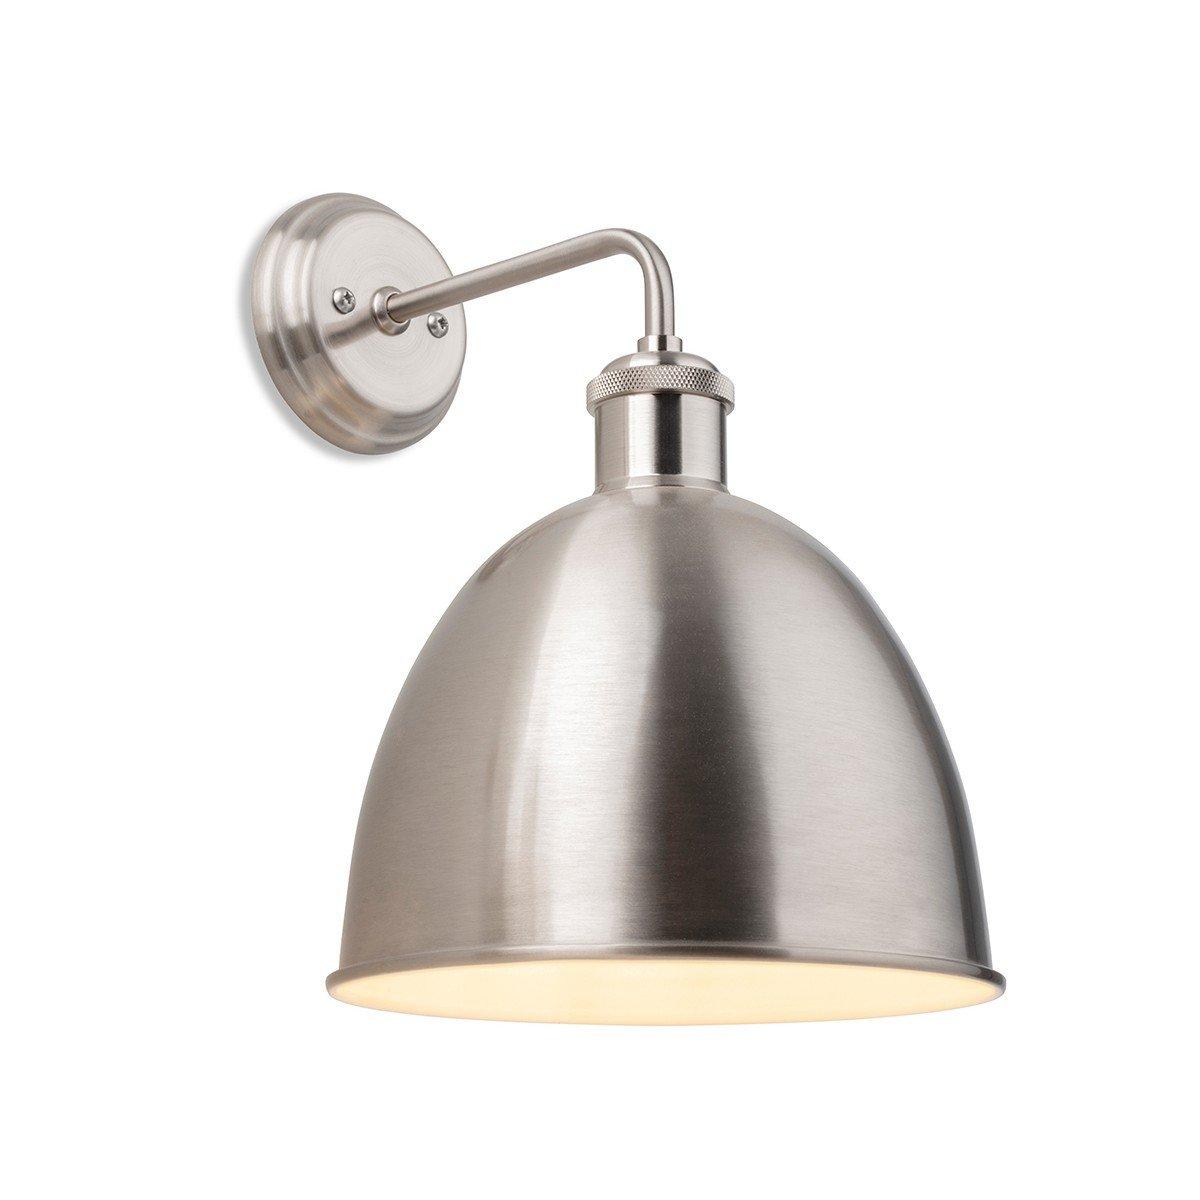 Genoa Industrial Dome Wall Light Brushed Steel